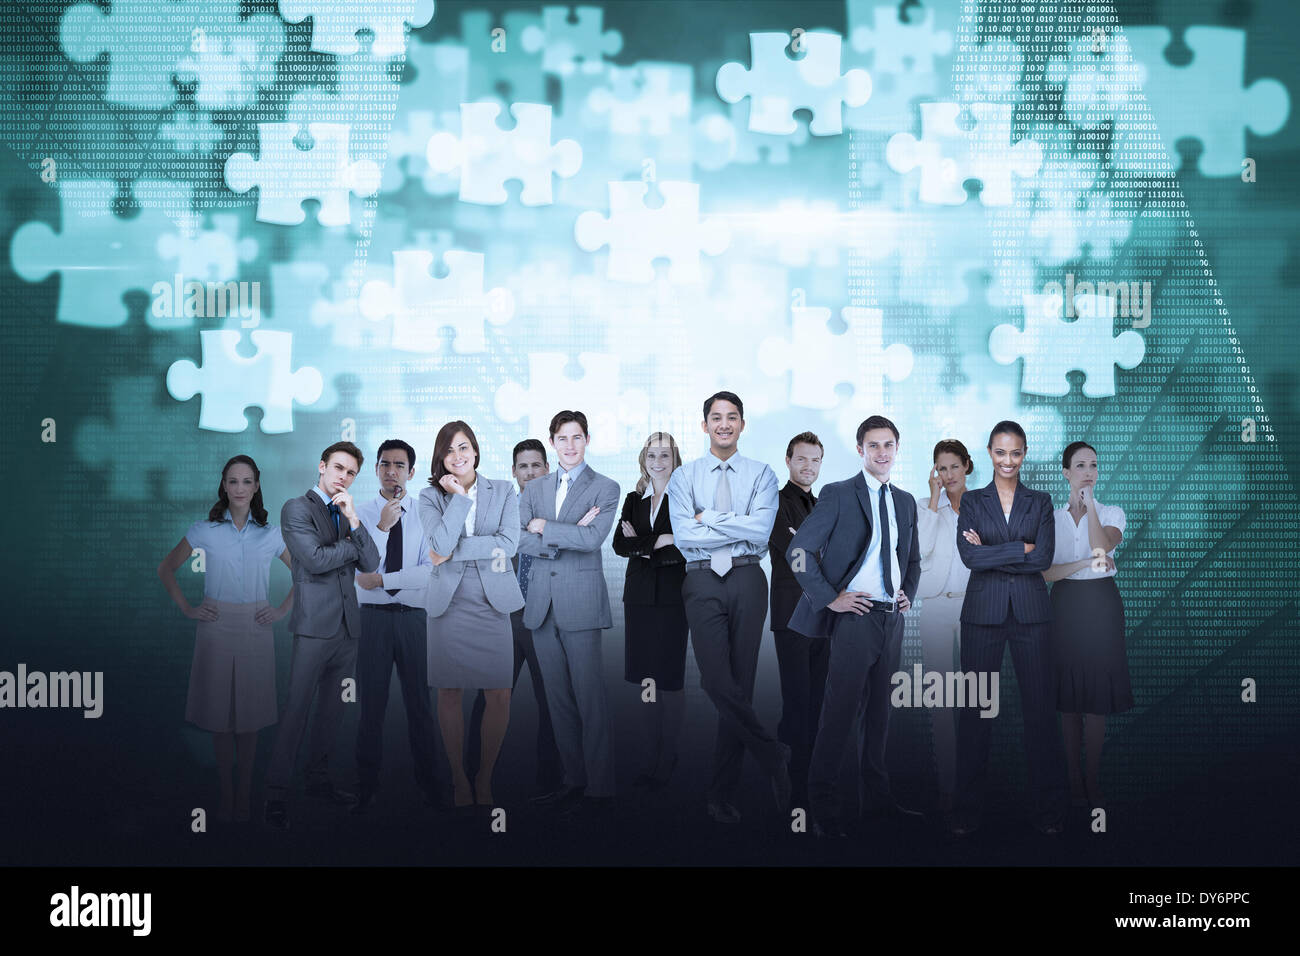 Business team against jigsaw background Stock Photo